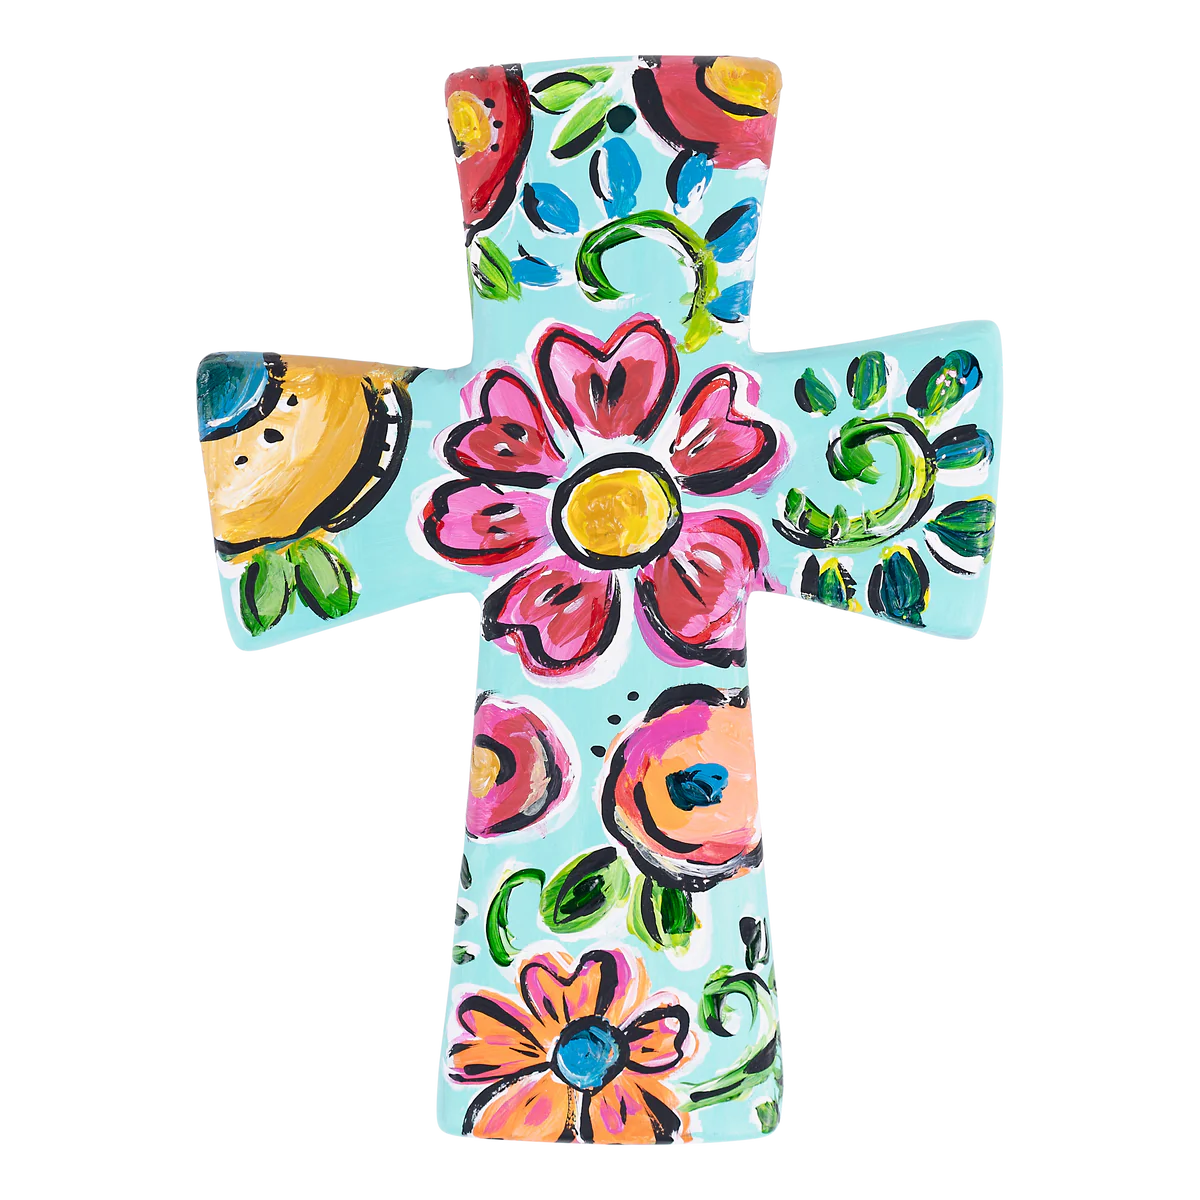 Turquoise Floral Cross